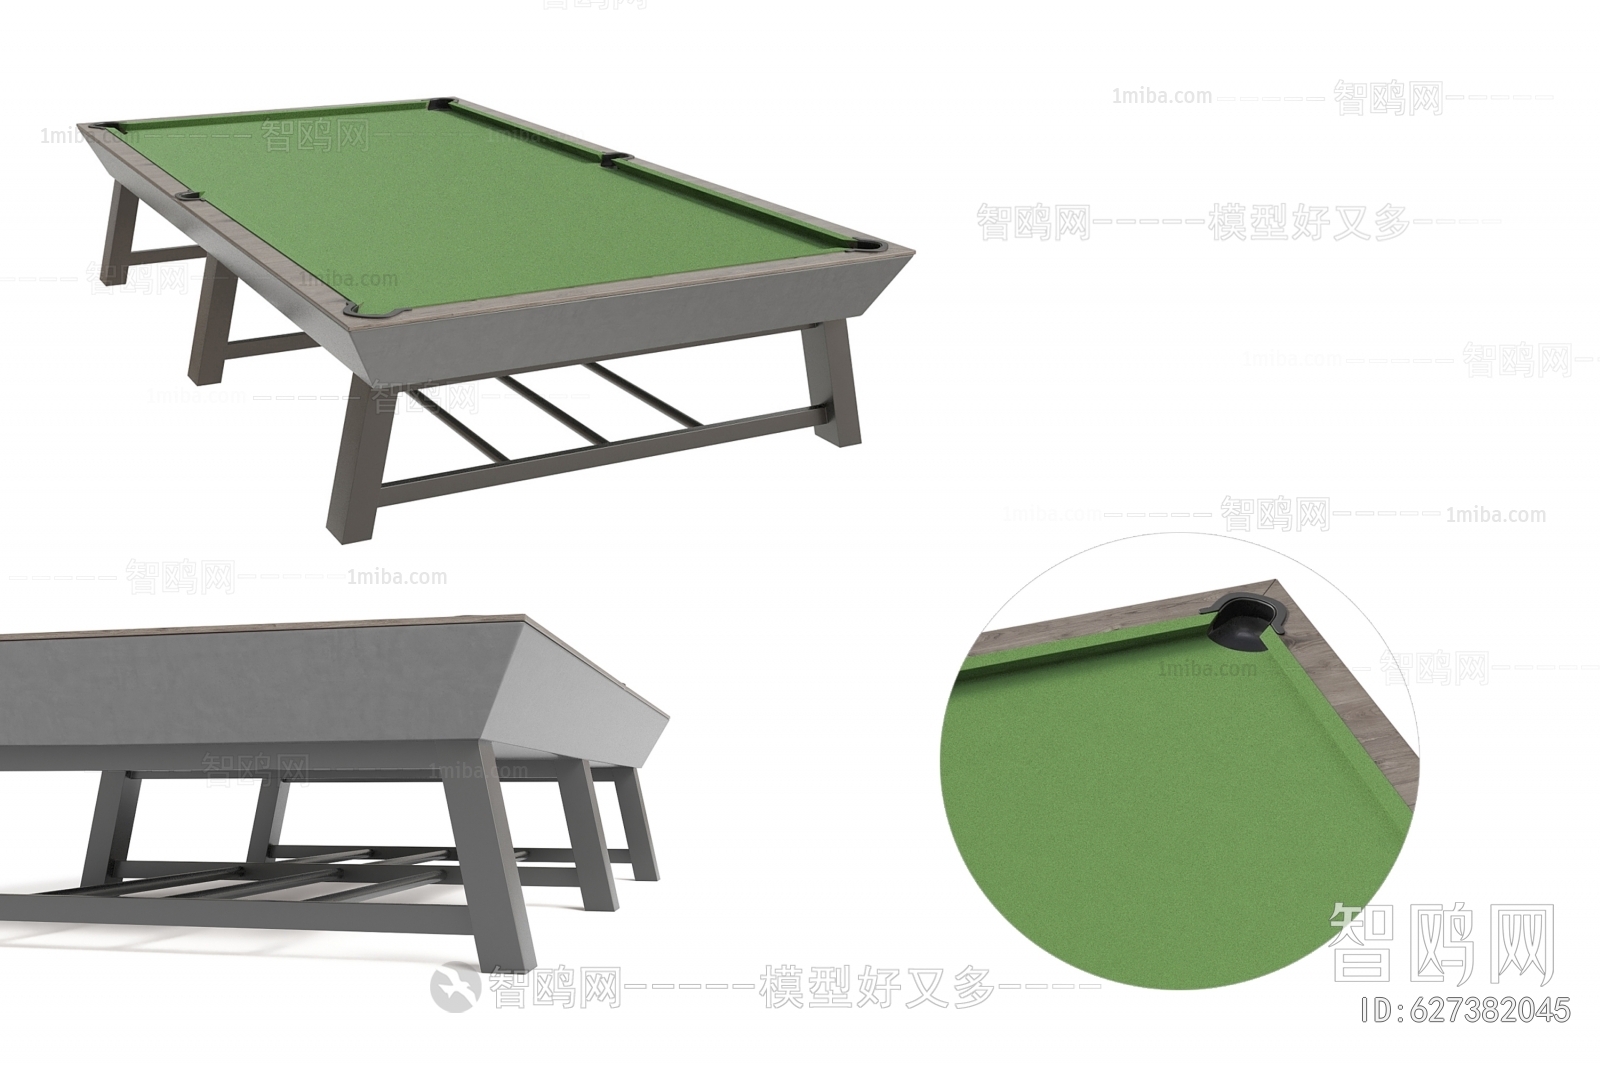 Nordic Style Pool Table